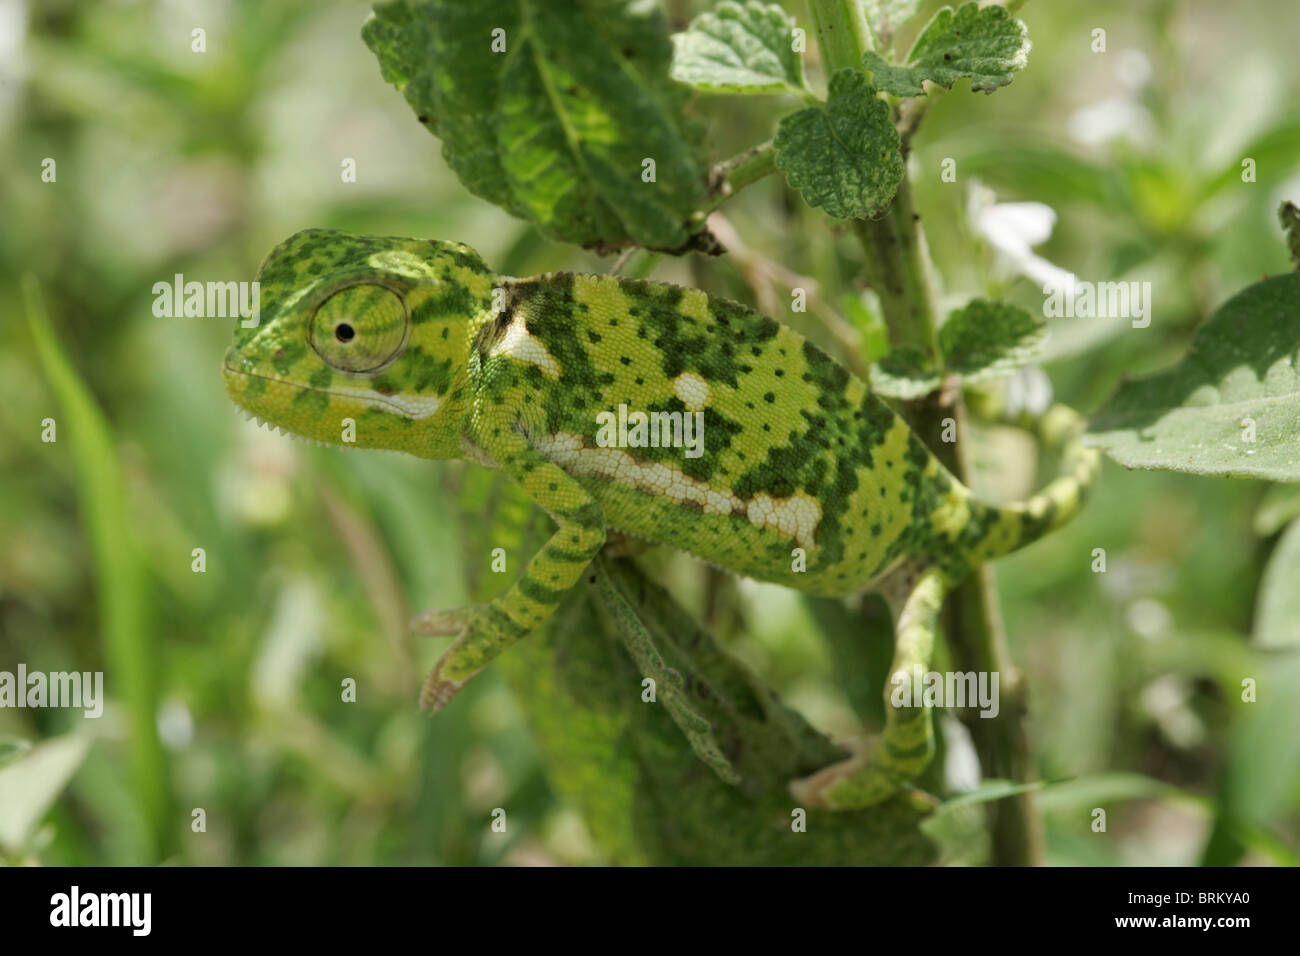 Chameleon standing on a plant Stock Photo